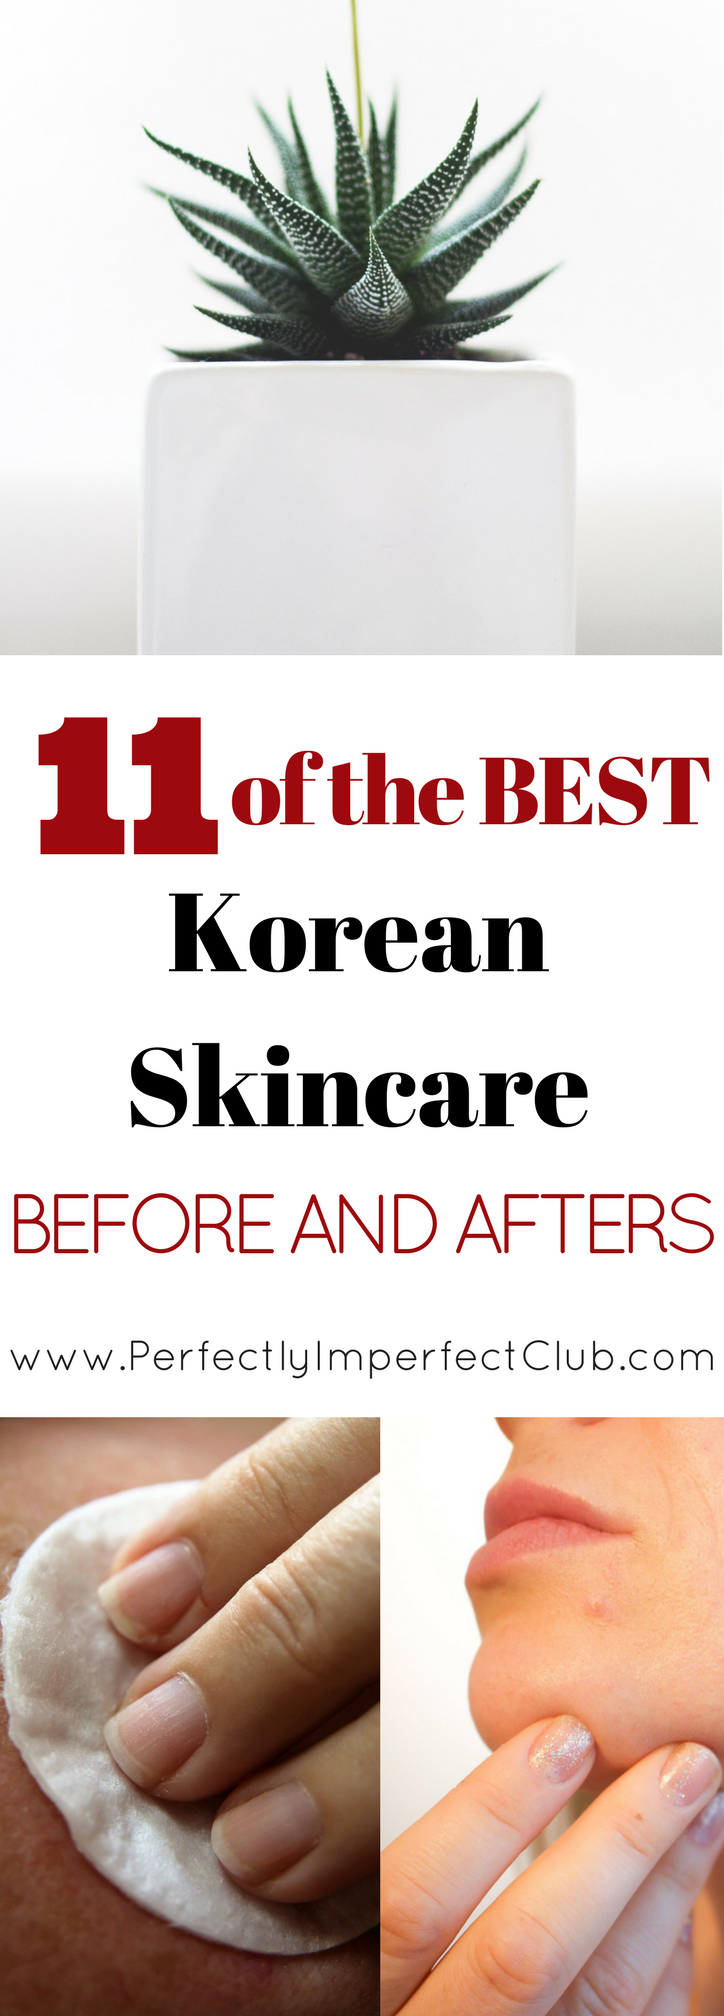 Ever wondered exactly what a Korean skincare routine can do for your skin? Here's 11 of the best Korean skincare before and afters.